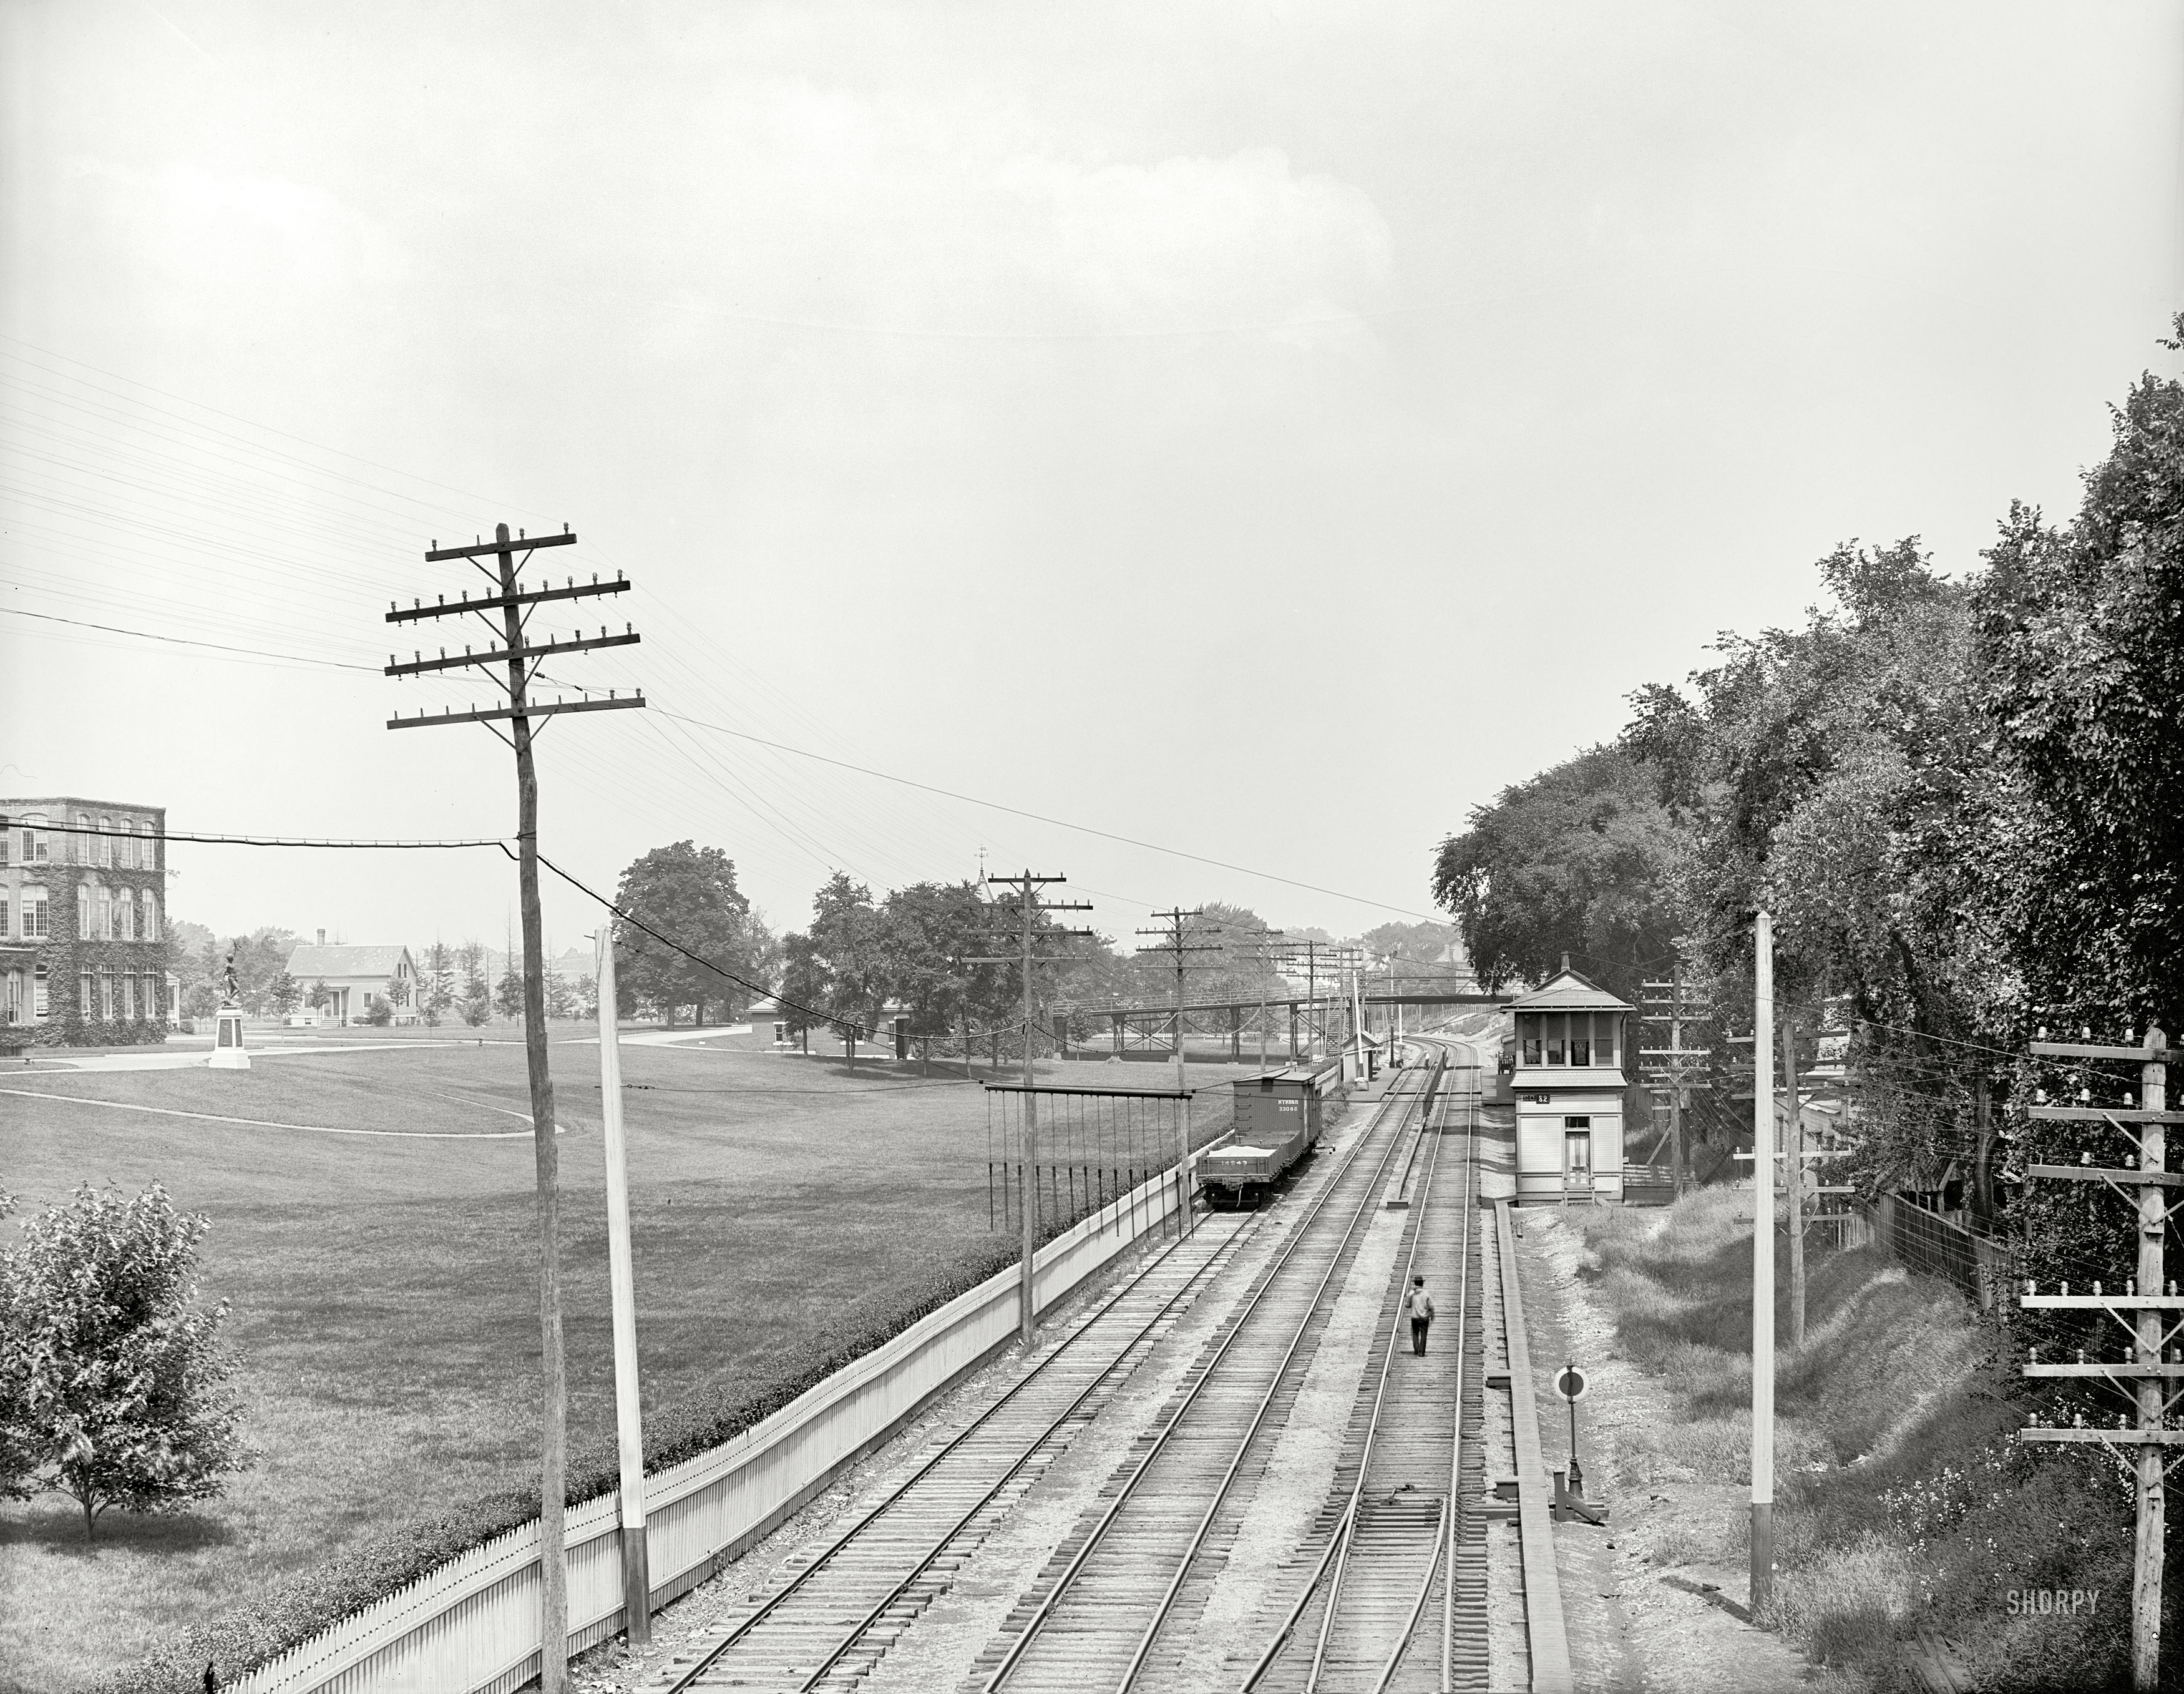 Providence, Rhode Island, circa 1906. "Gorham Manufacturing Co." 8x10 inch dry plate glass negative, Detroit Publishing Company. View full size.